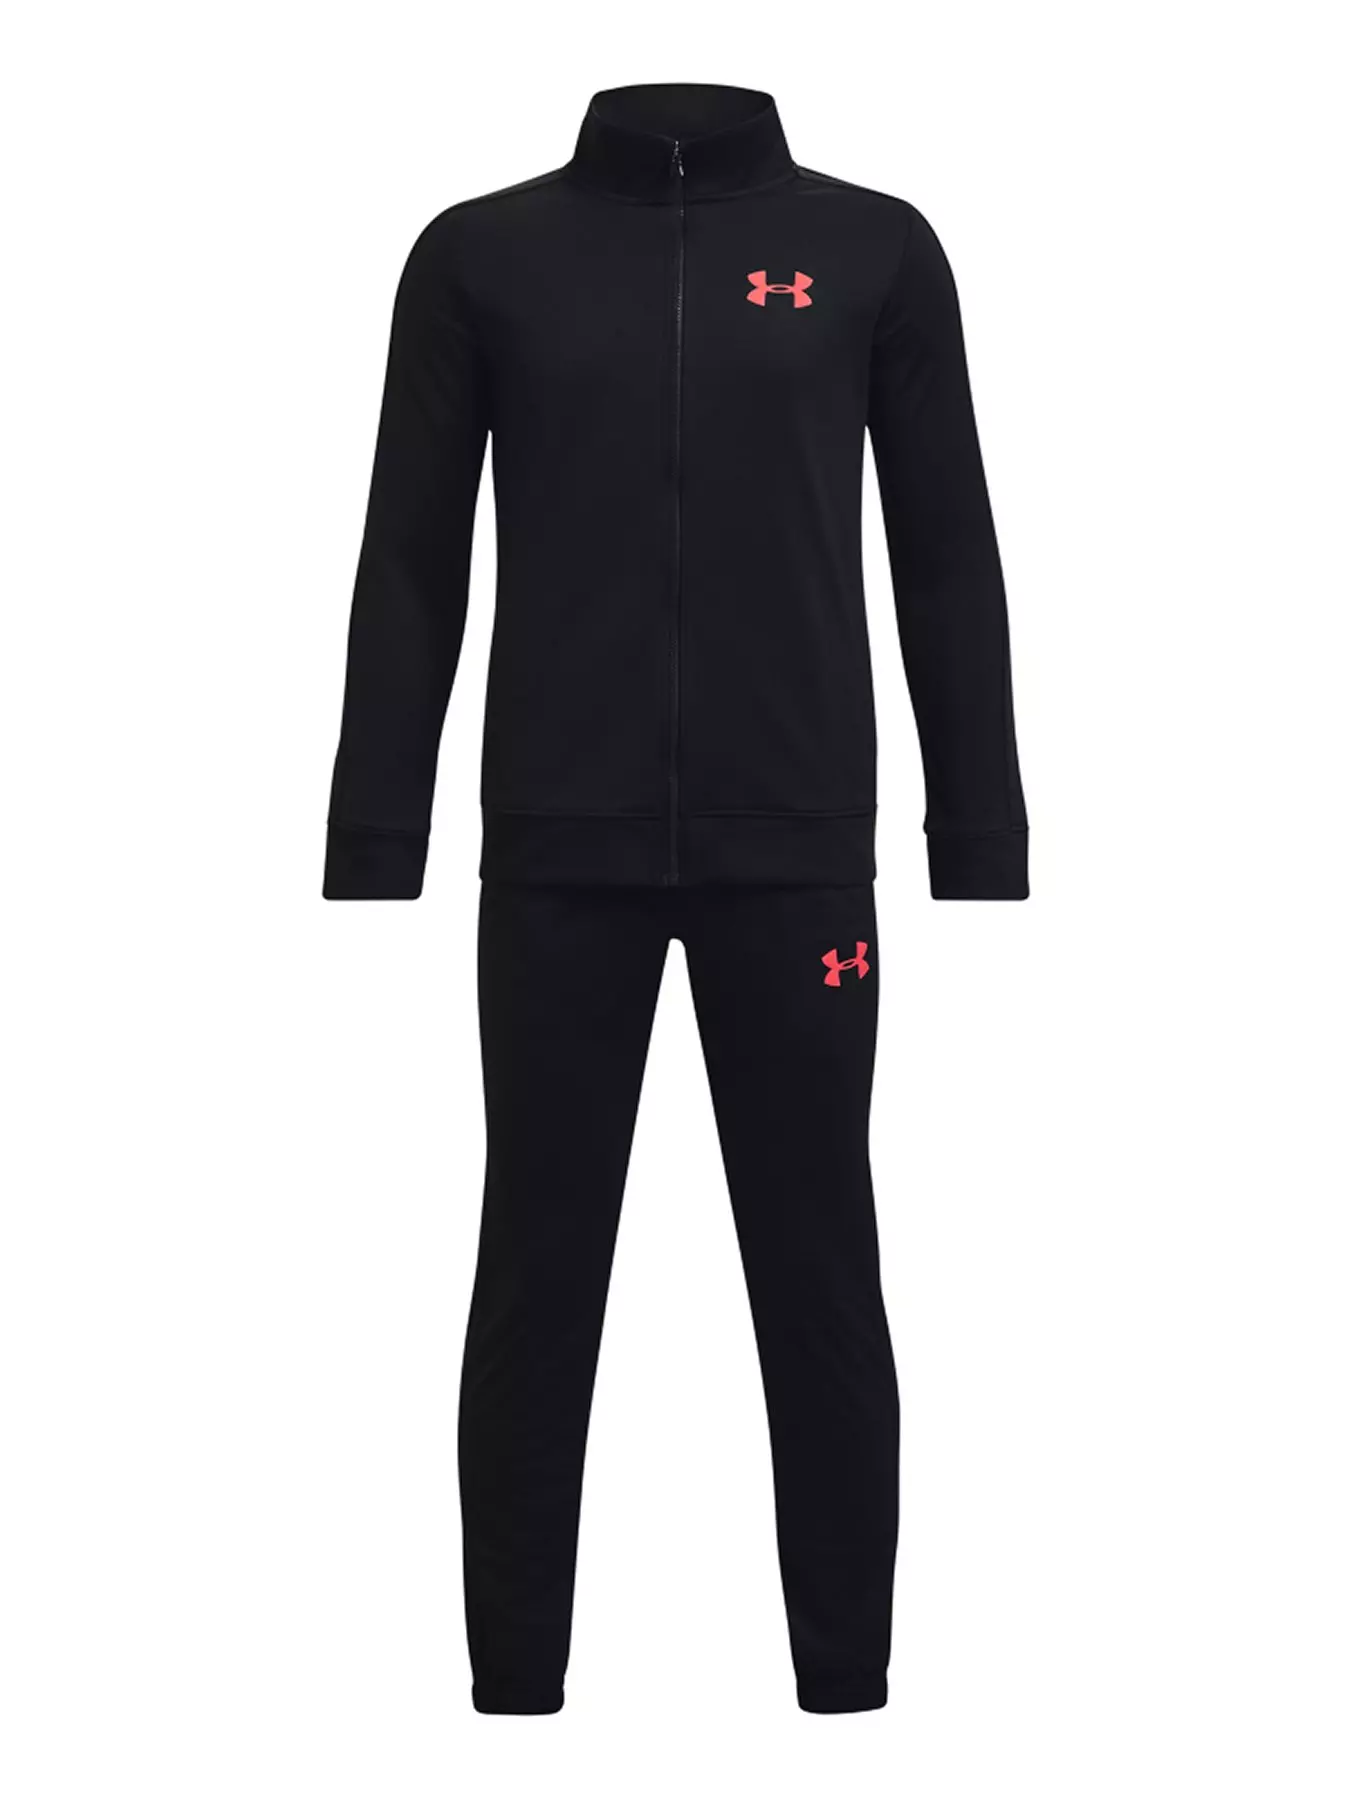 Under armour, Tracksuits, Kids & baby sports clothing